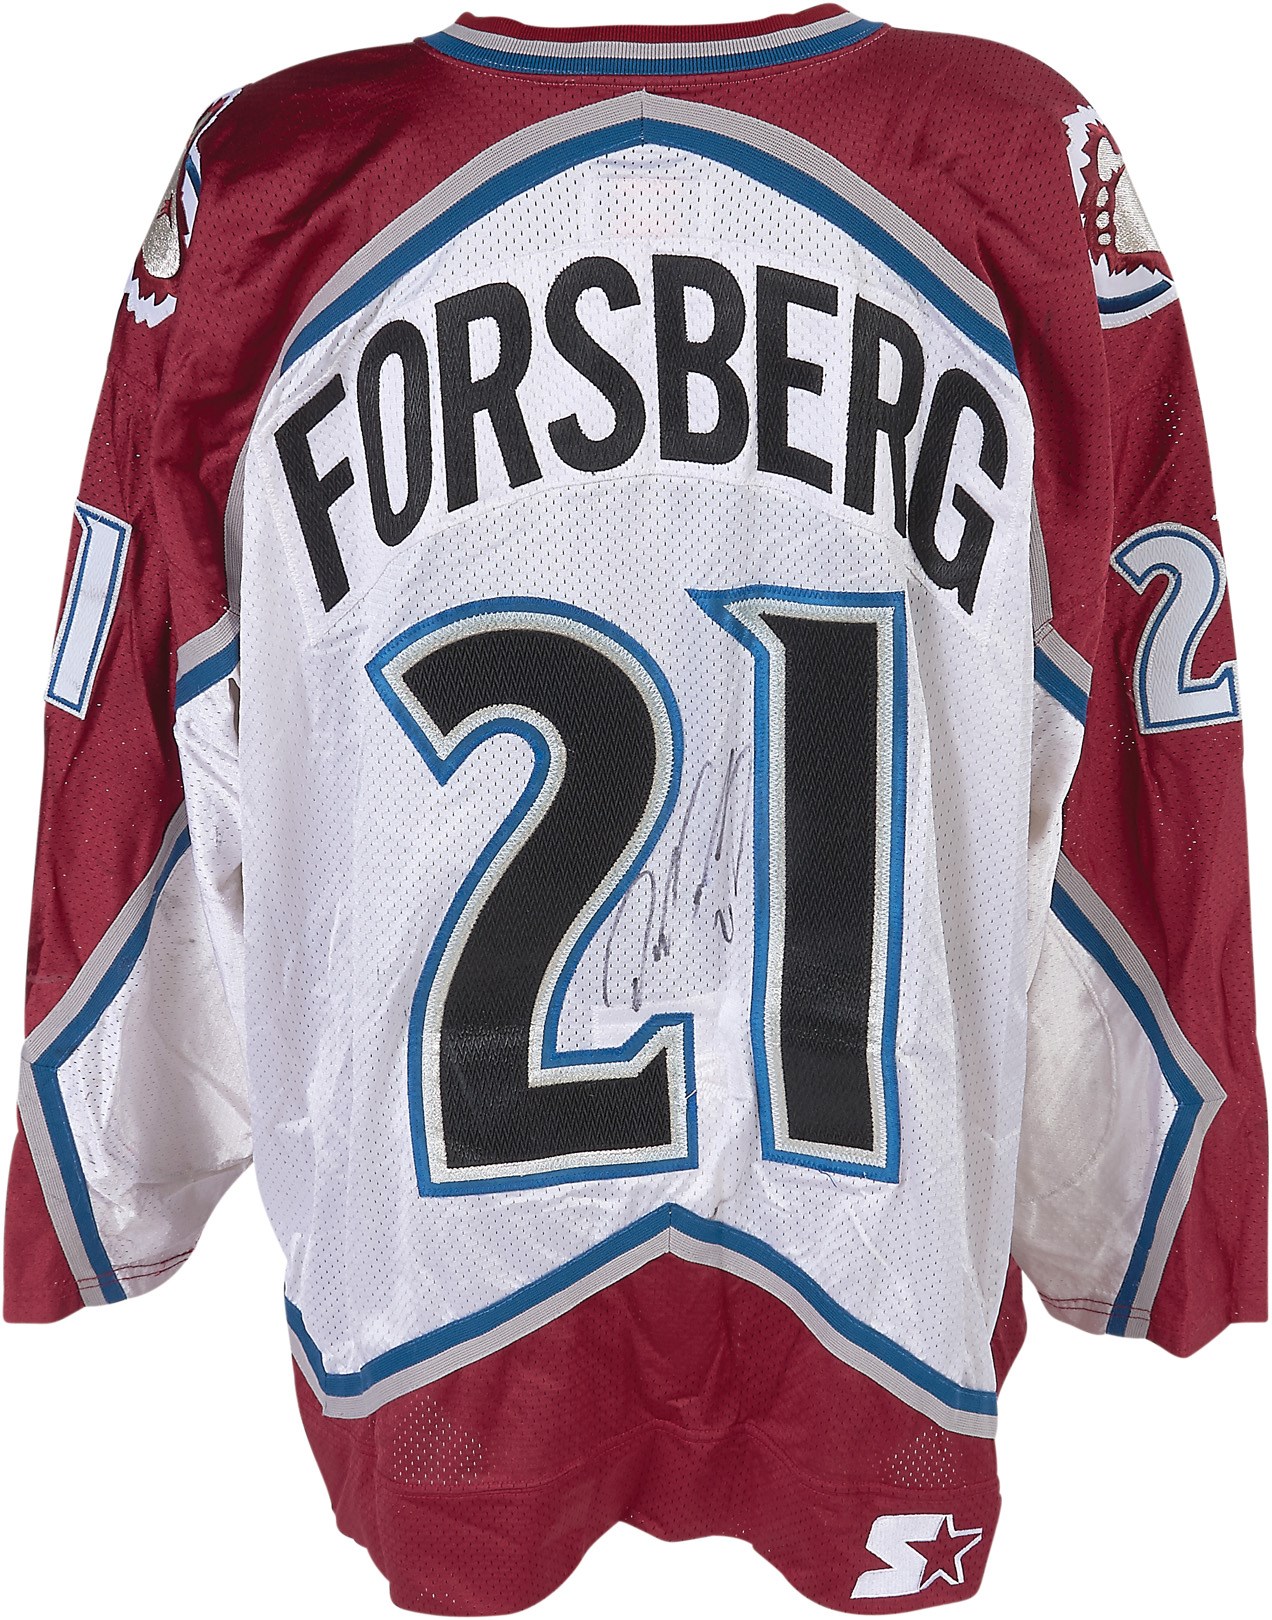 Hockey - 1998-99 Peter Forsberg Colorado Avalanche Game Worn Jersey (Photo-Matched, MeiGray)